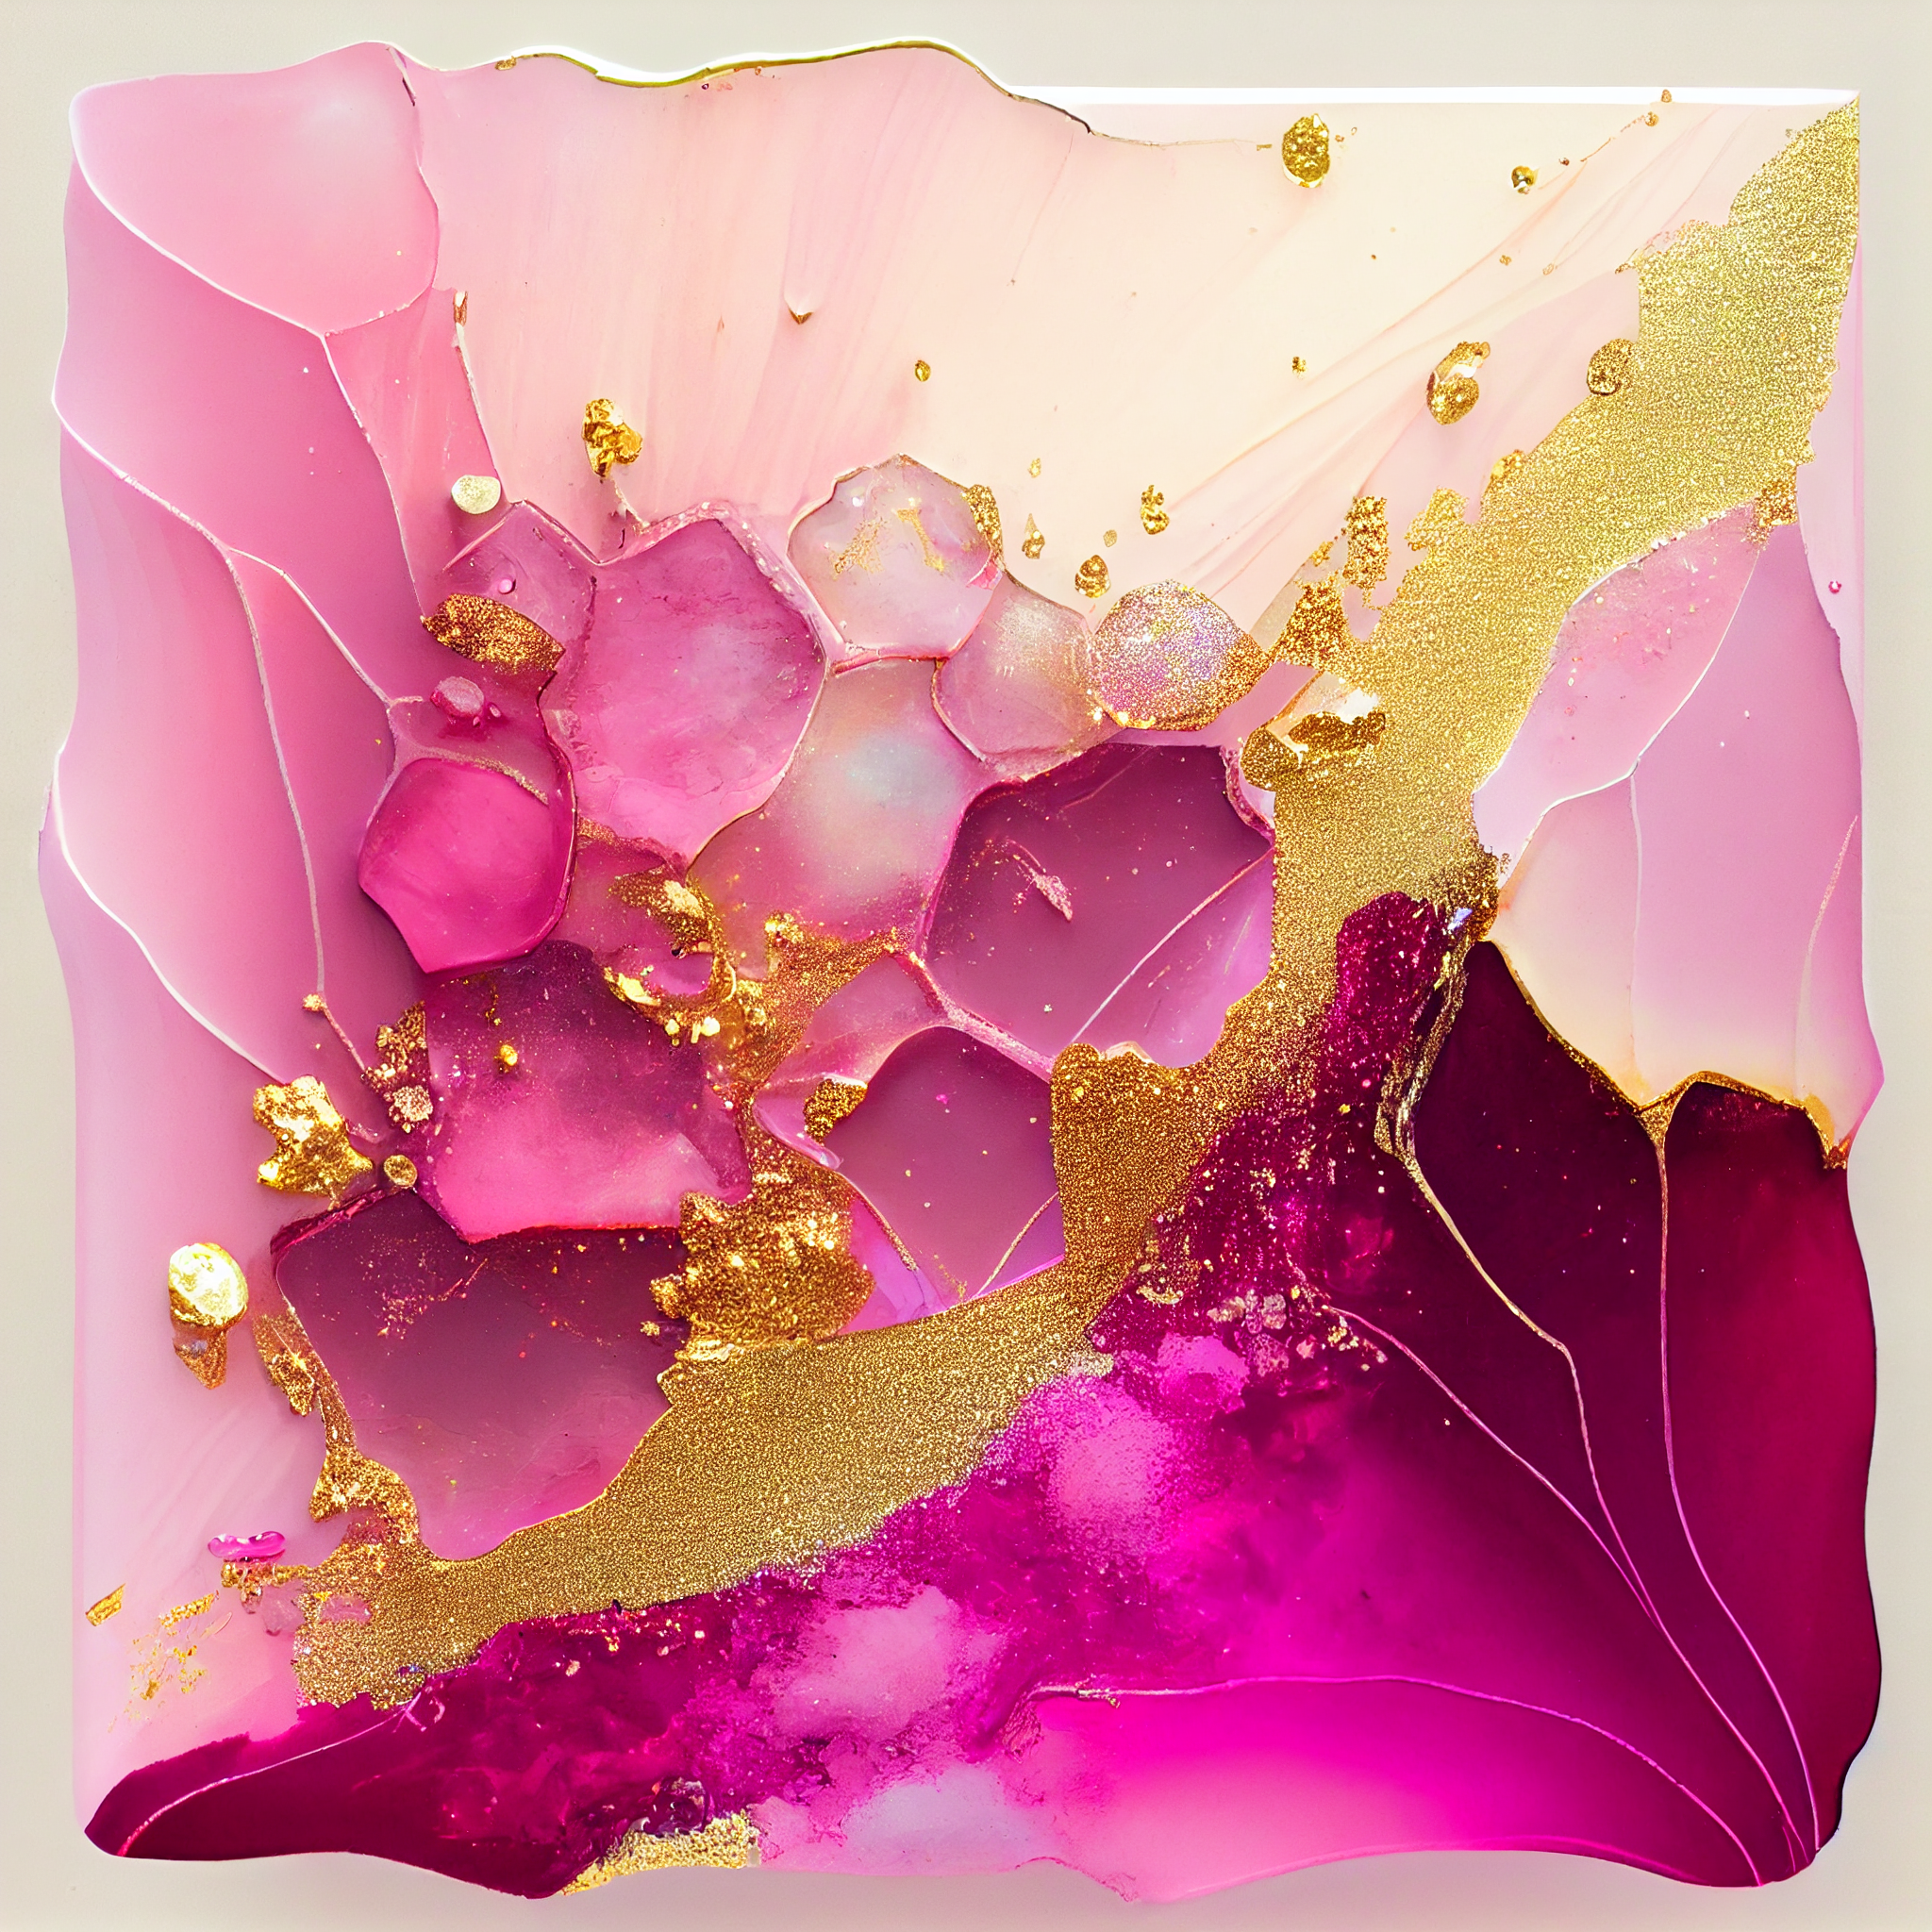 "Pink Perfection: Elevate Your Home Decor with this Stunning Resin Art Print for Your Living Space"